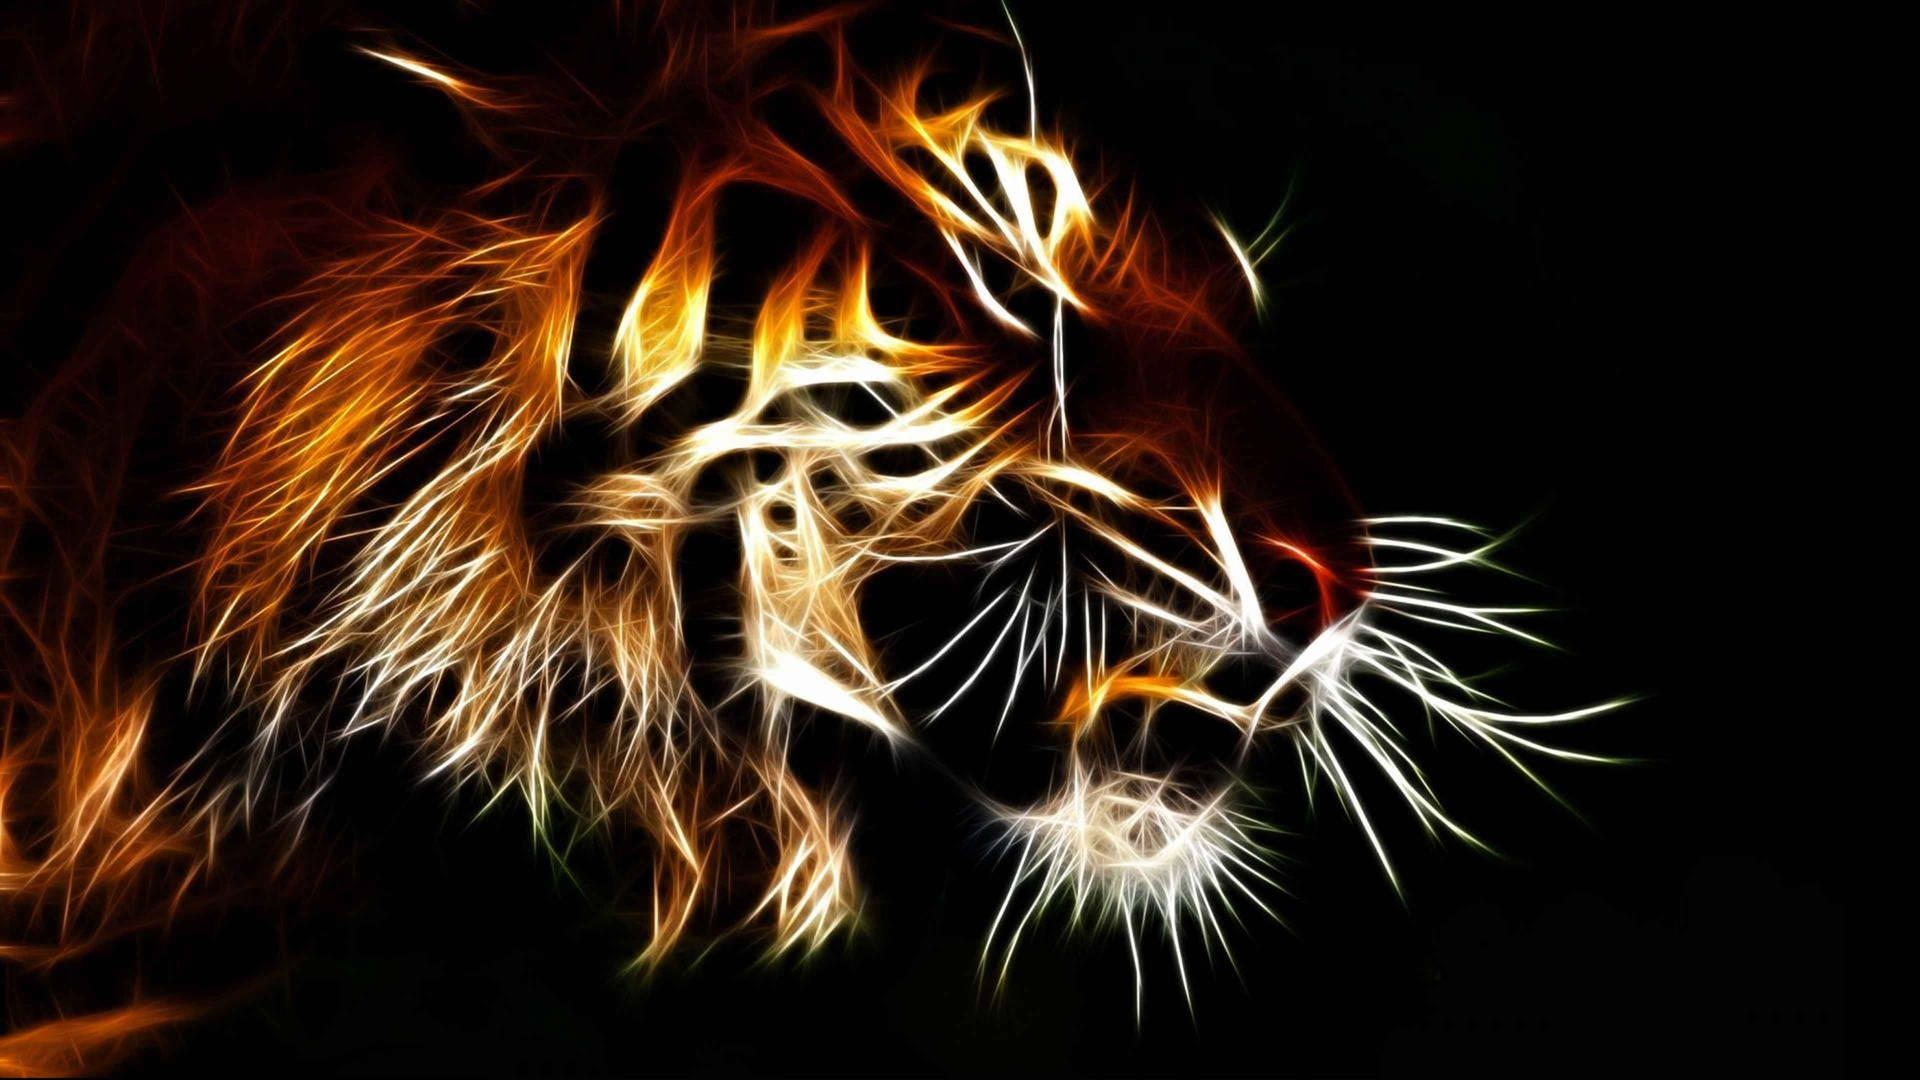 Cool Abstract Tiger Digital Art Background